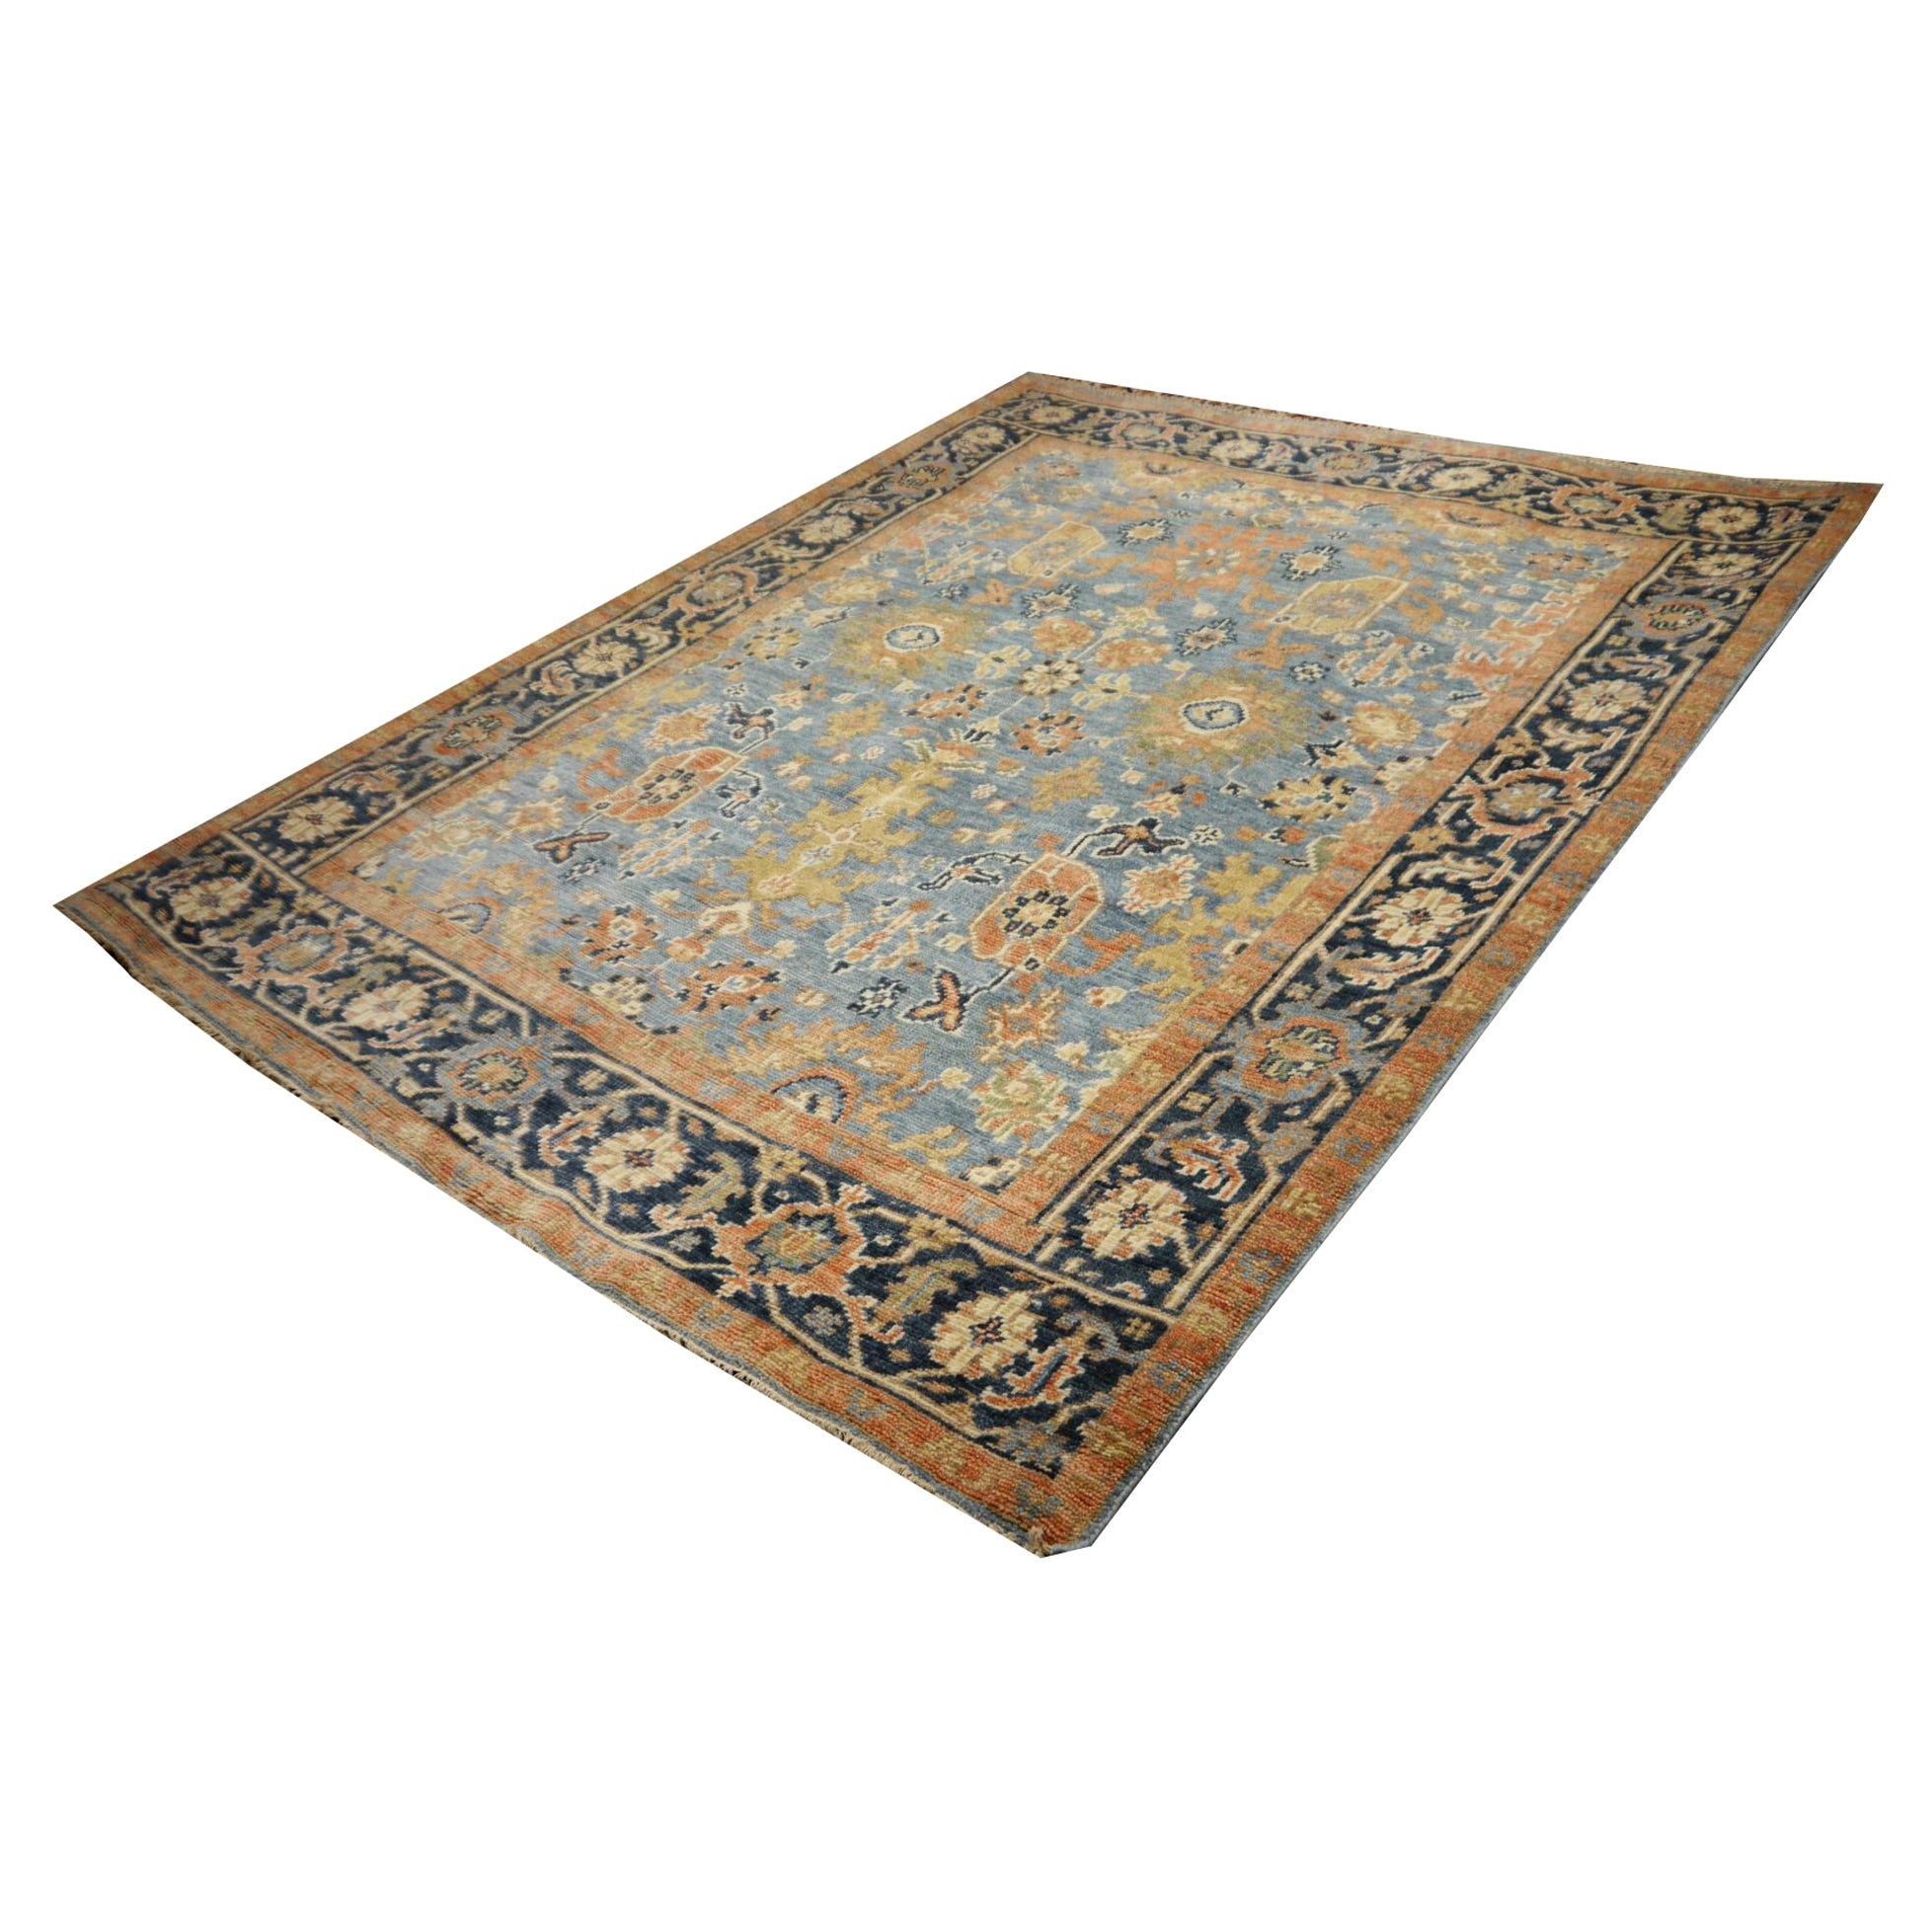 Beautiful Heriz rug from India - Djoharian Collection

Heriz rugs and carpets are mainly made of fine, hand-spun wool, 

This rug was made with a decorative traditional design. The style reminds of Karaja, Gerawan, Shirvan and Serapi rugs.

Origin: